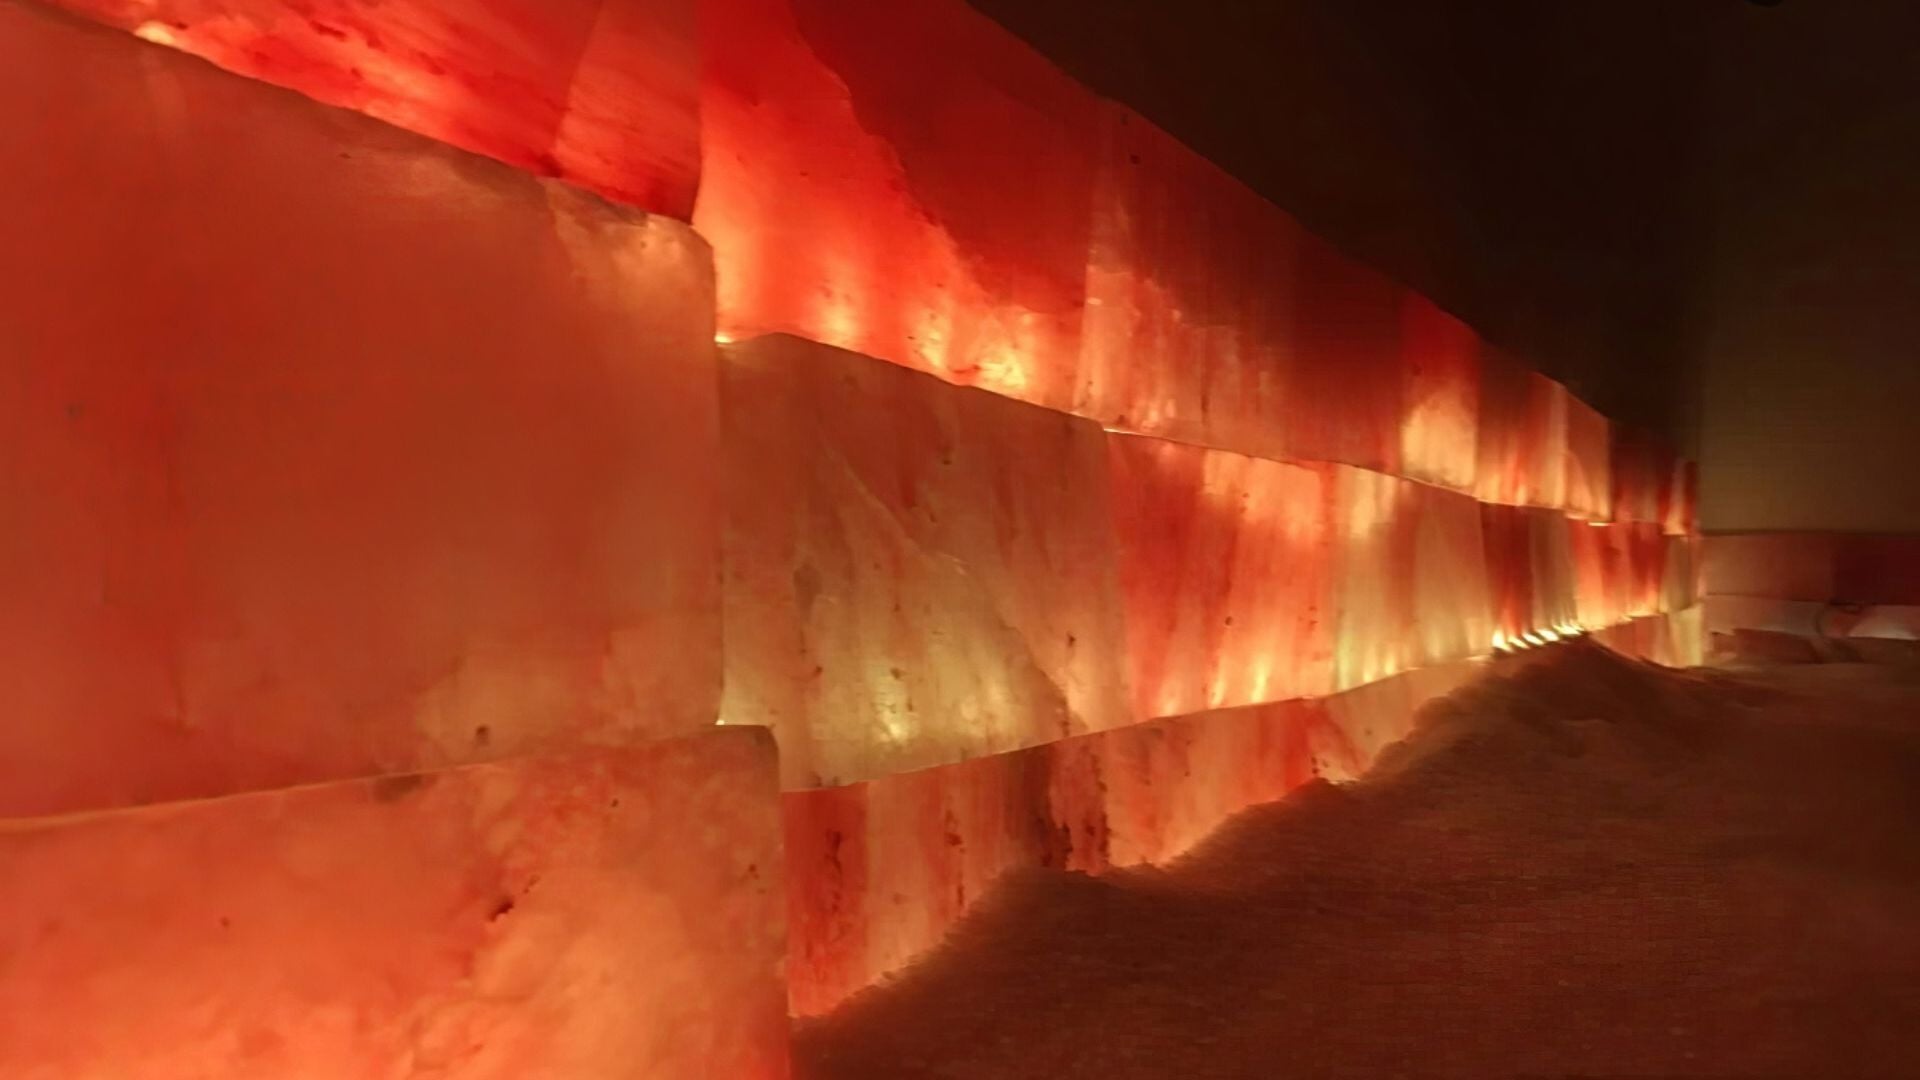 Himalayan Salt Rooms: Should You Try One?